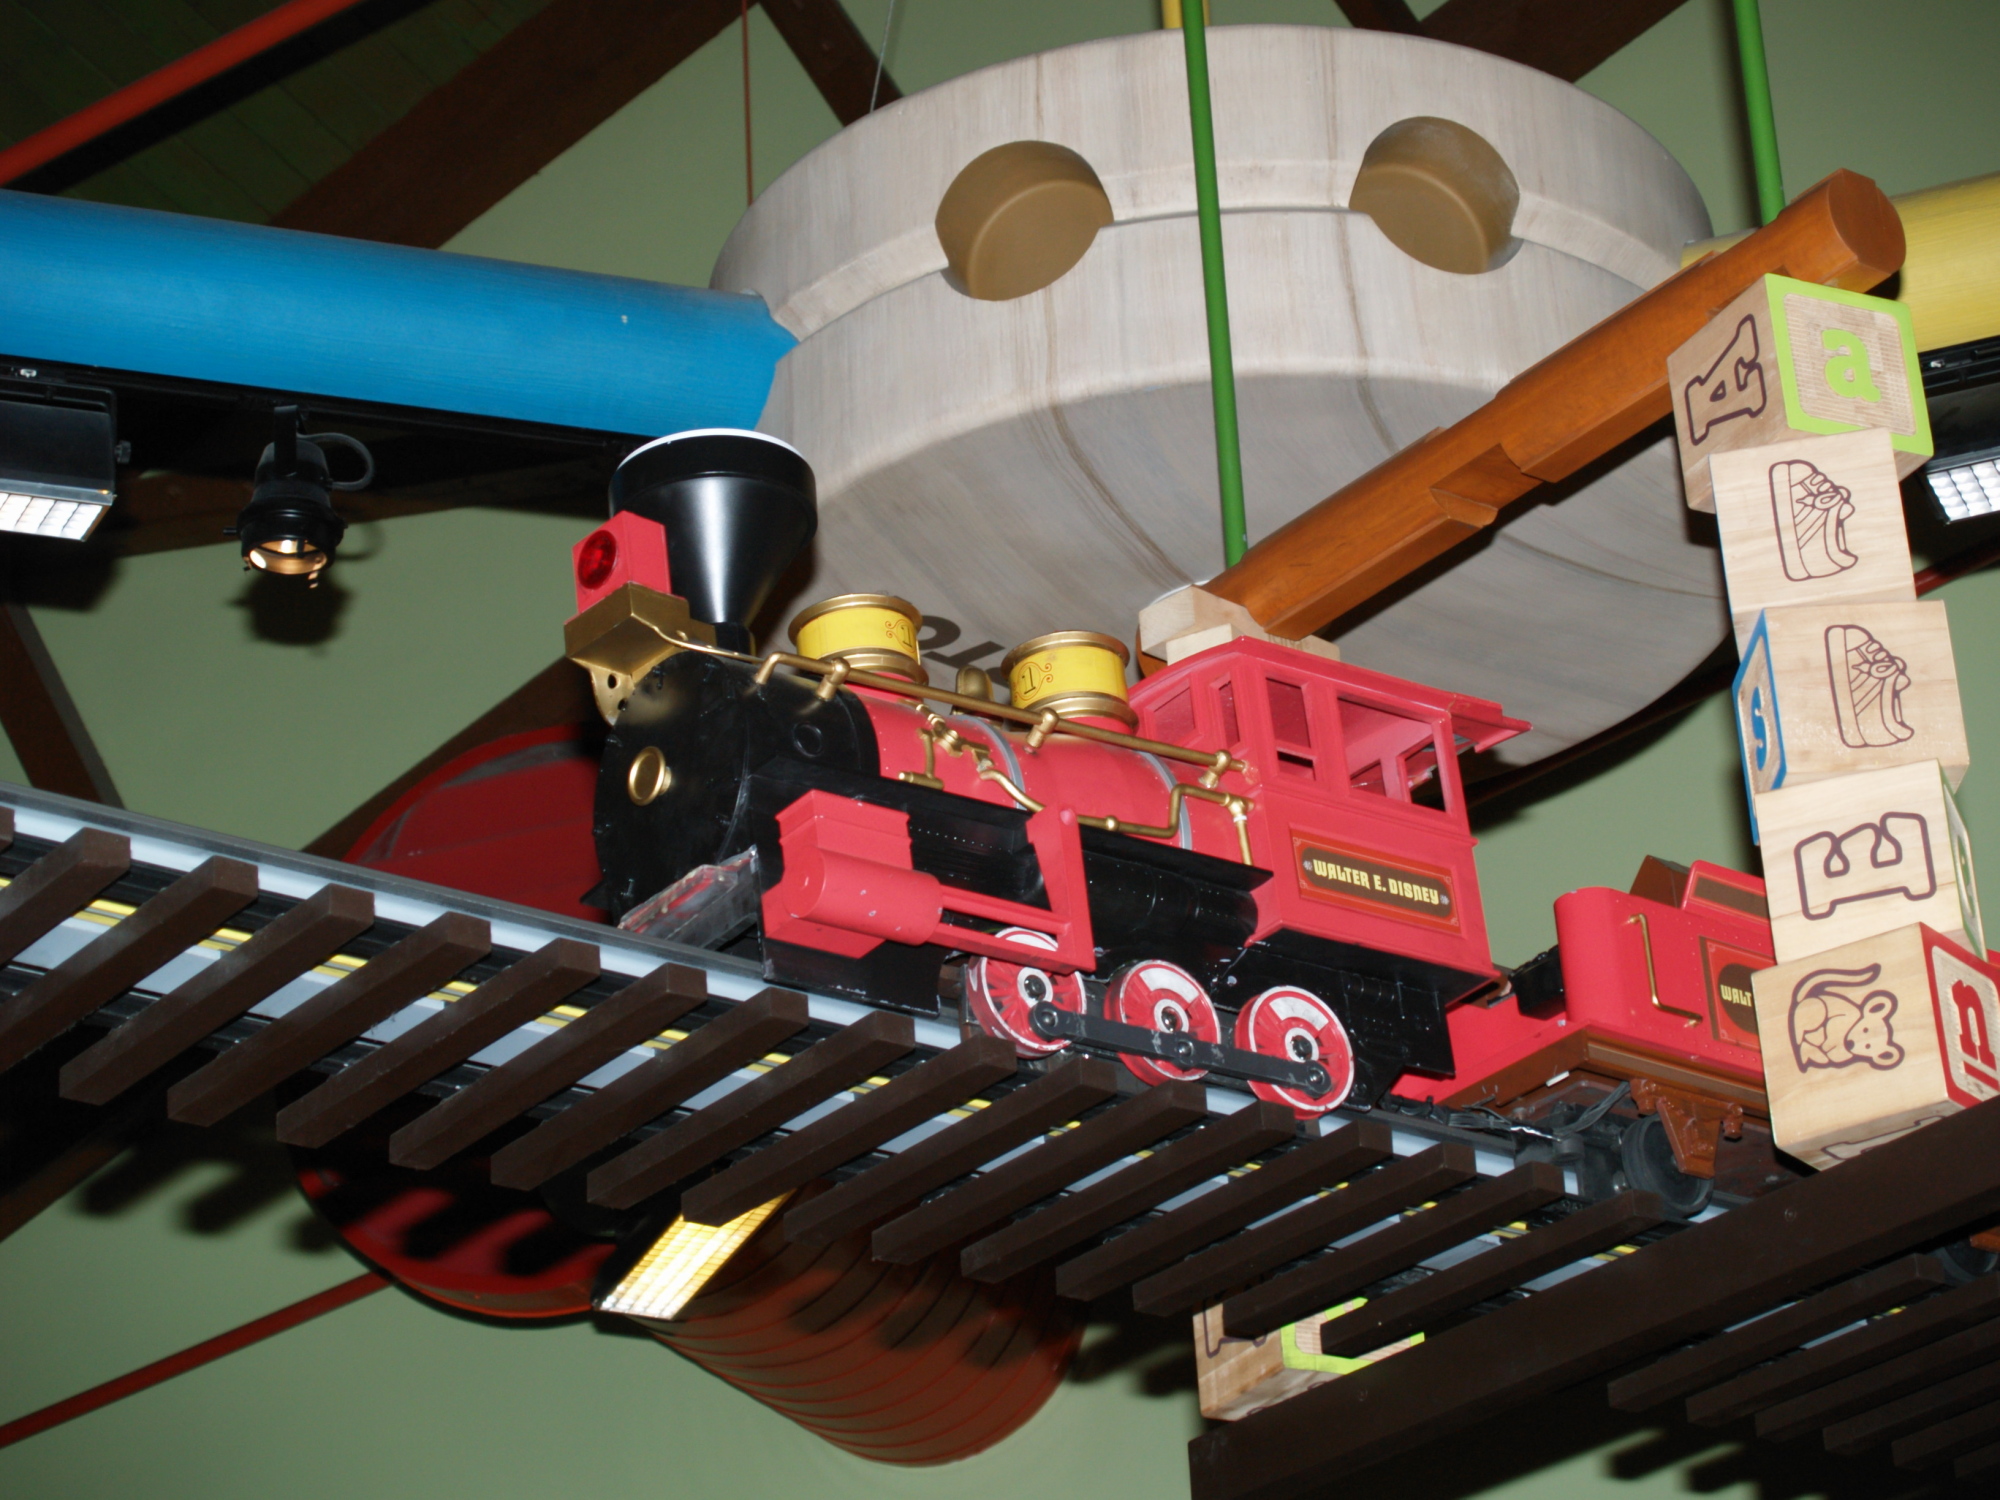 Downtown Disney - Once Upon A Toy - Train